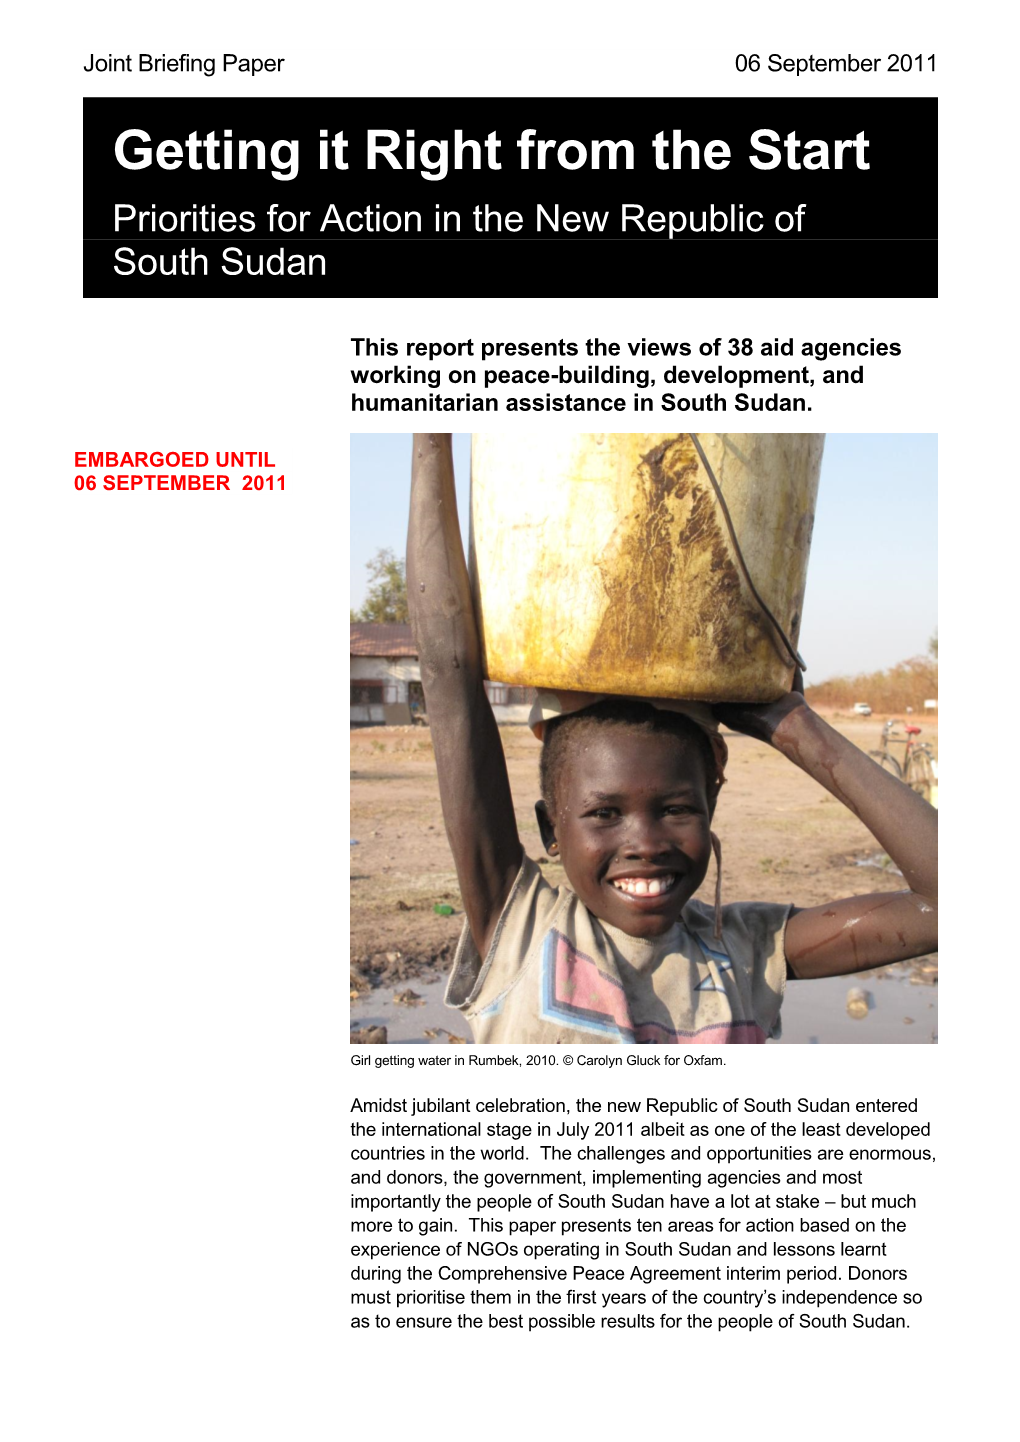 Getting It Right from the Start Priorities for Action in the New Republic of South Sudan